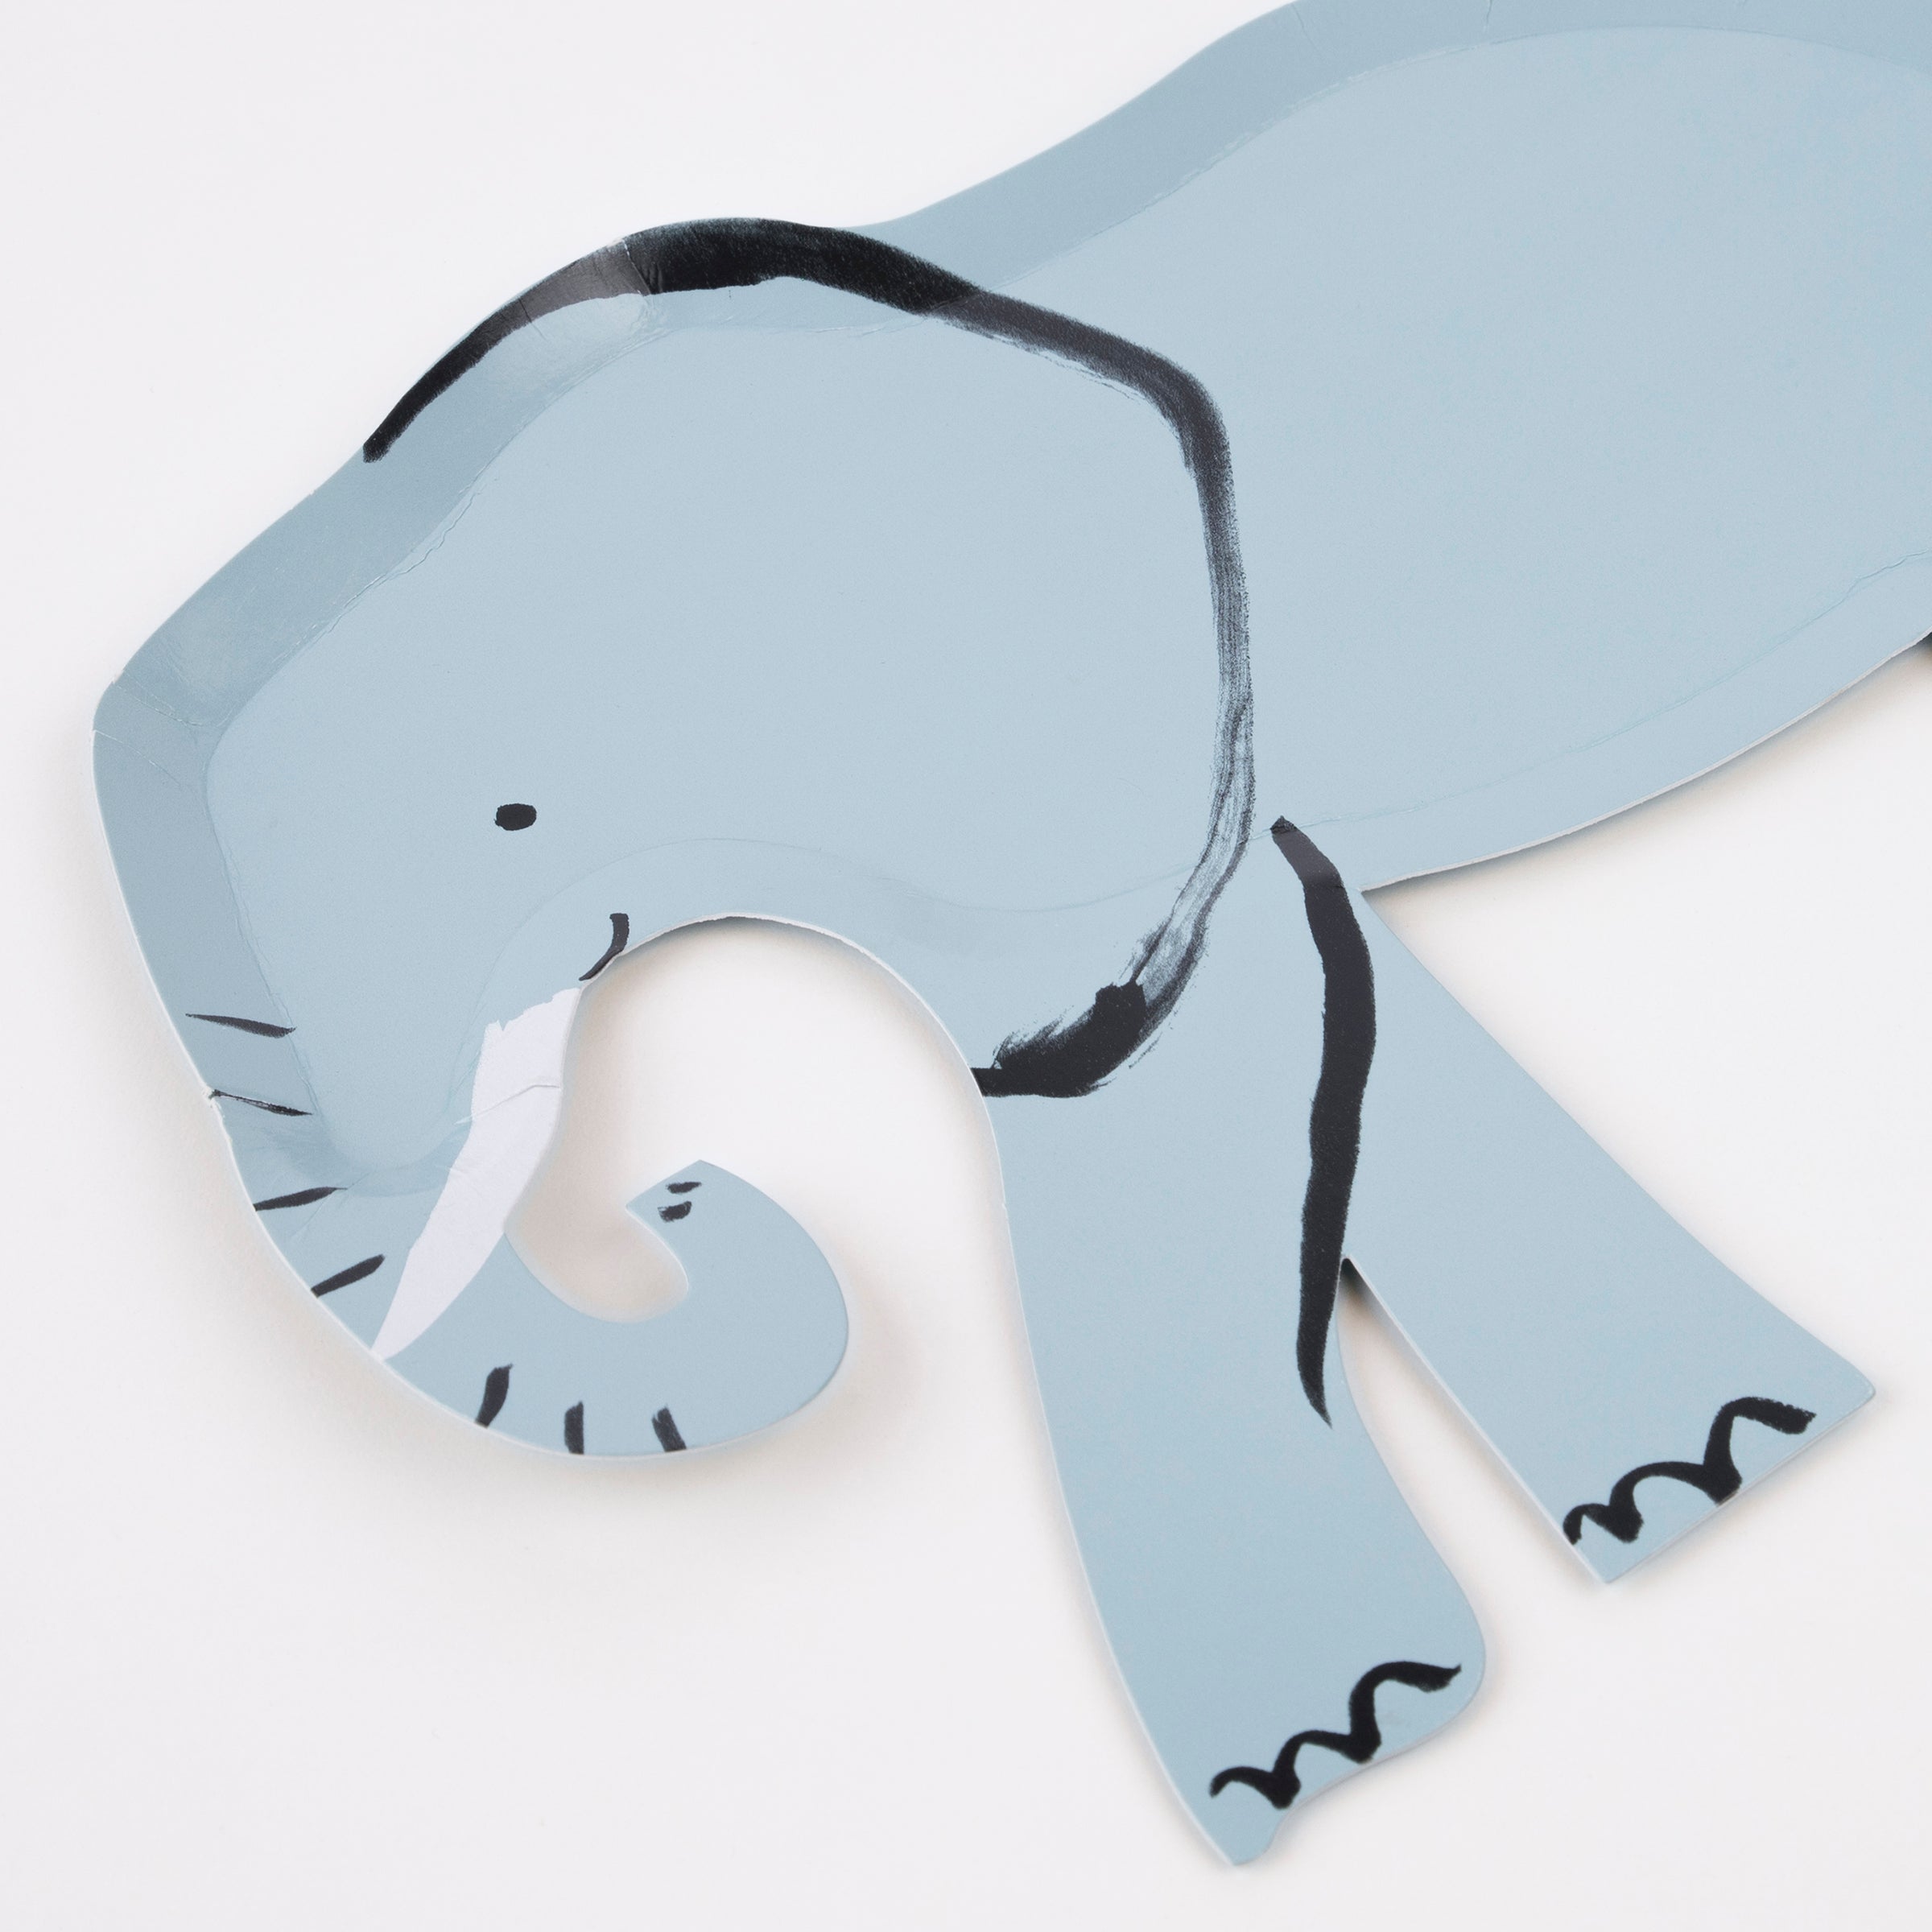 Our paper party plates, in the shape of an elephant, are ideal for a safari birthday party.